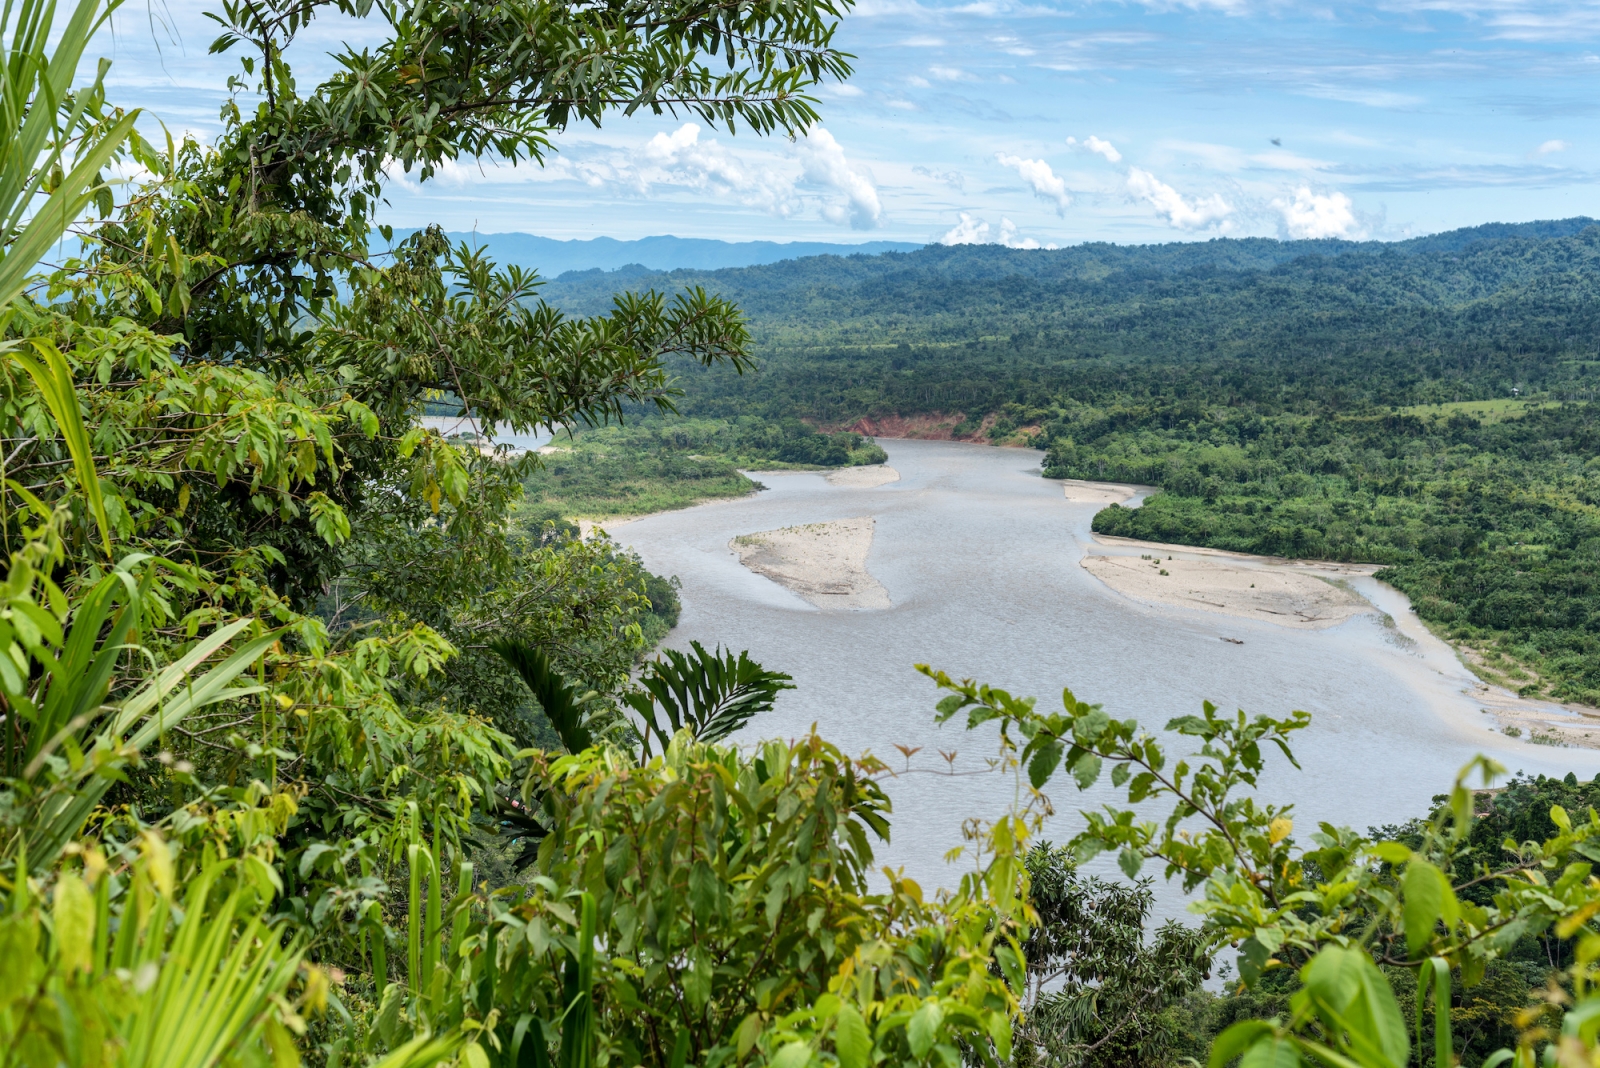 View of the Amazonia lush forest from Manu National Reserve Park in Peru